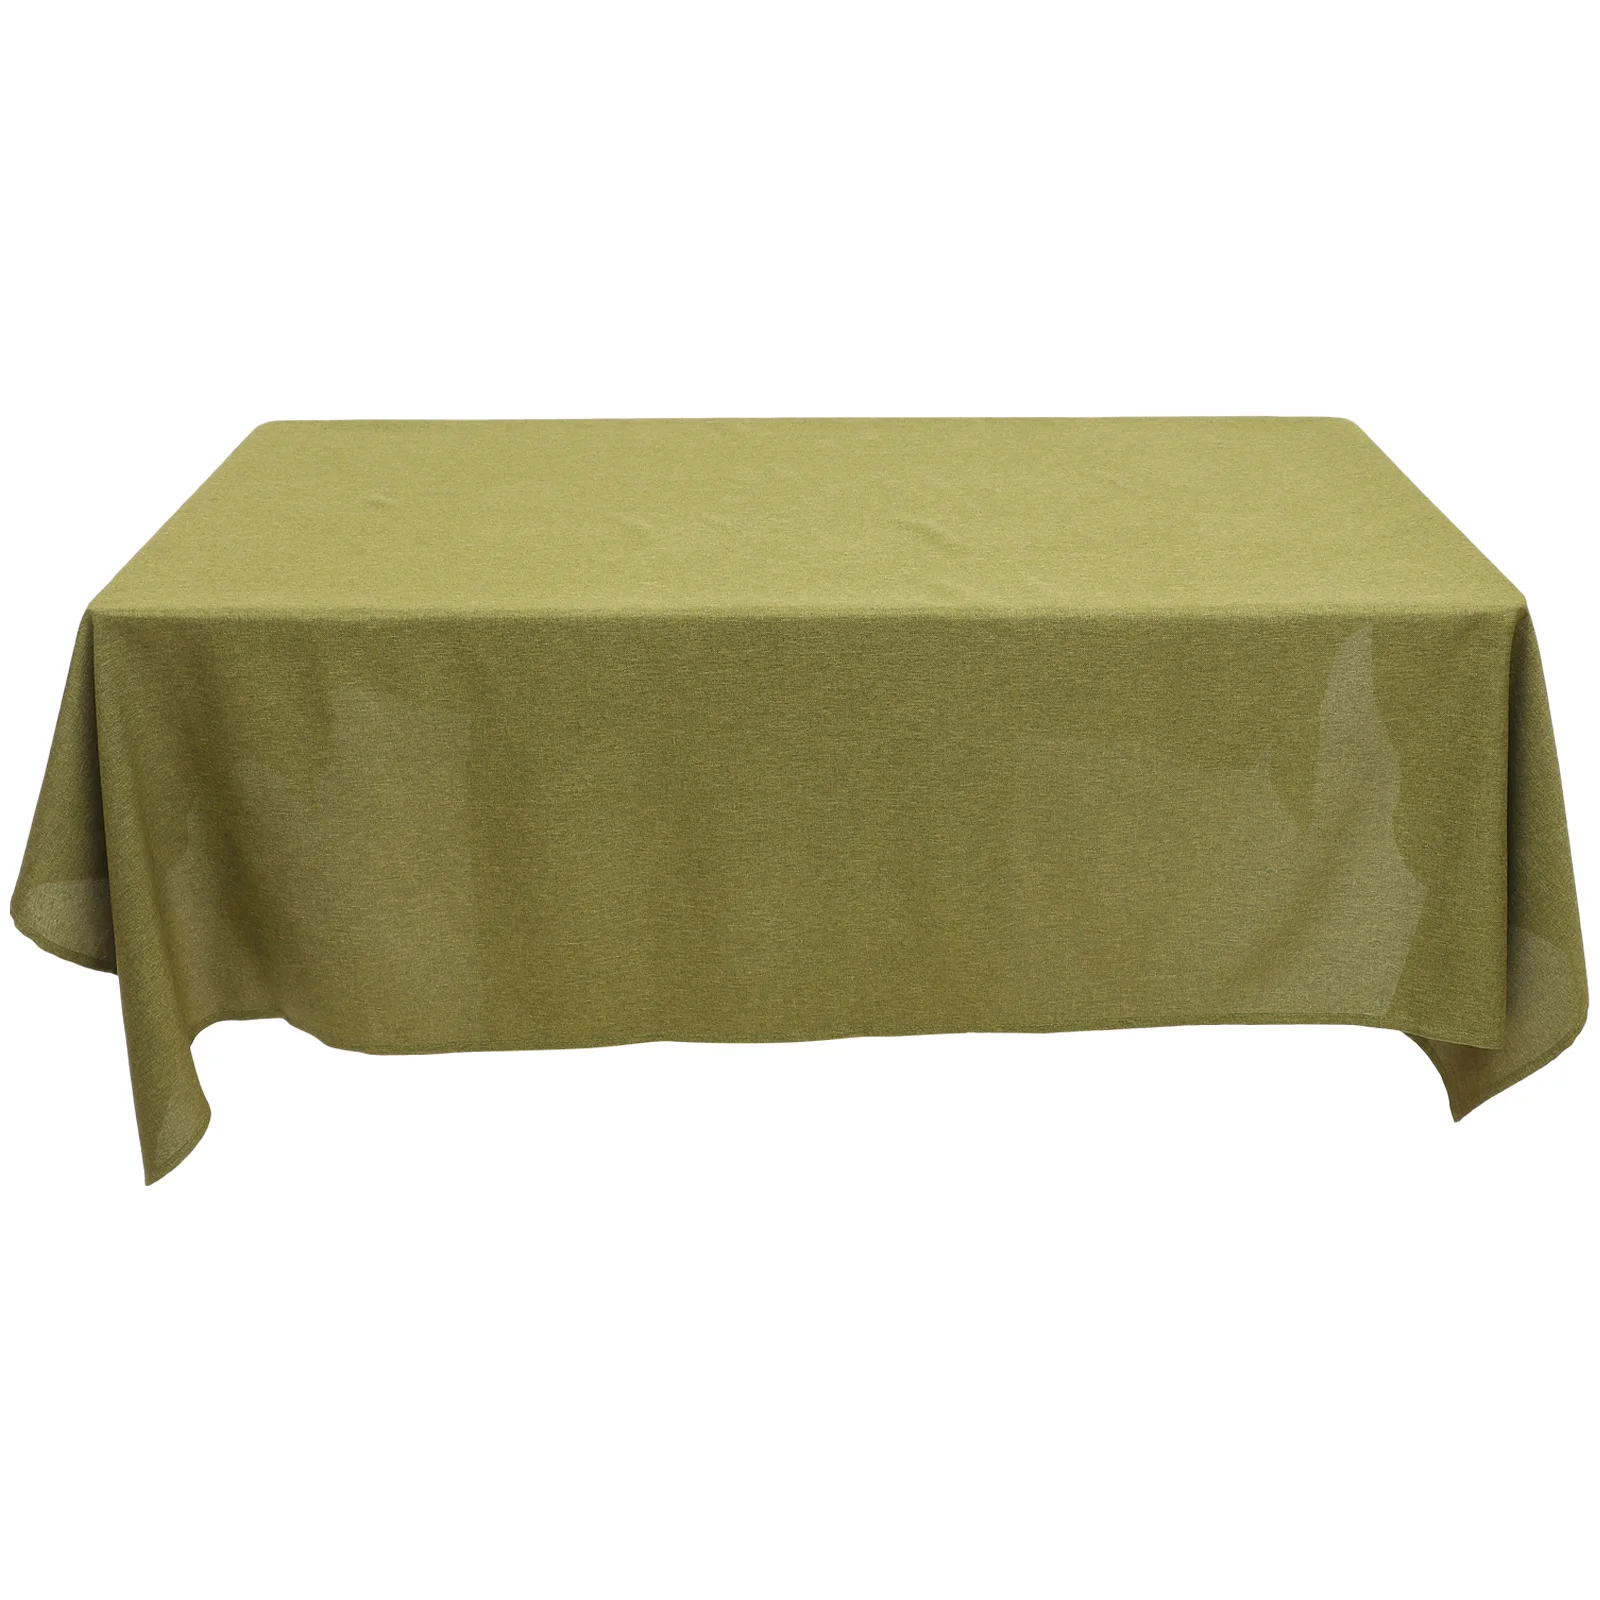 

Tablecloth Table Tablecloths Cloth Elegant Primitive Tea Party Farmhouse Modern Fabric Coloring Dining Cover Covering